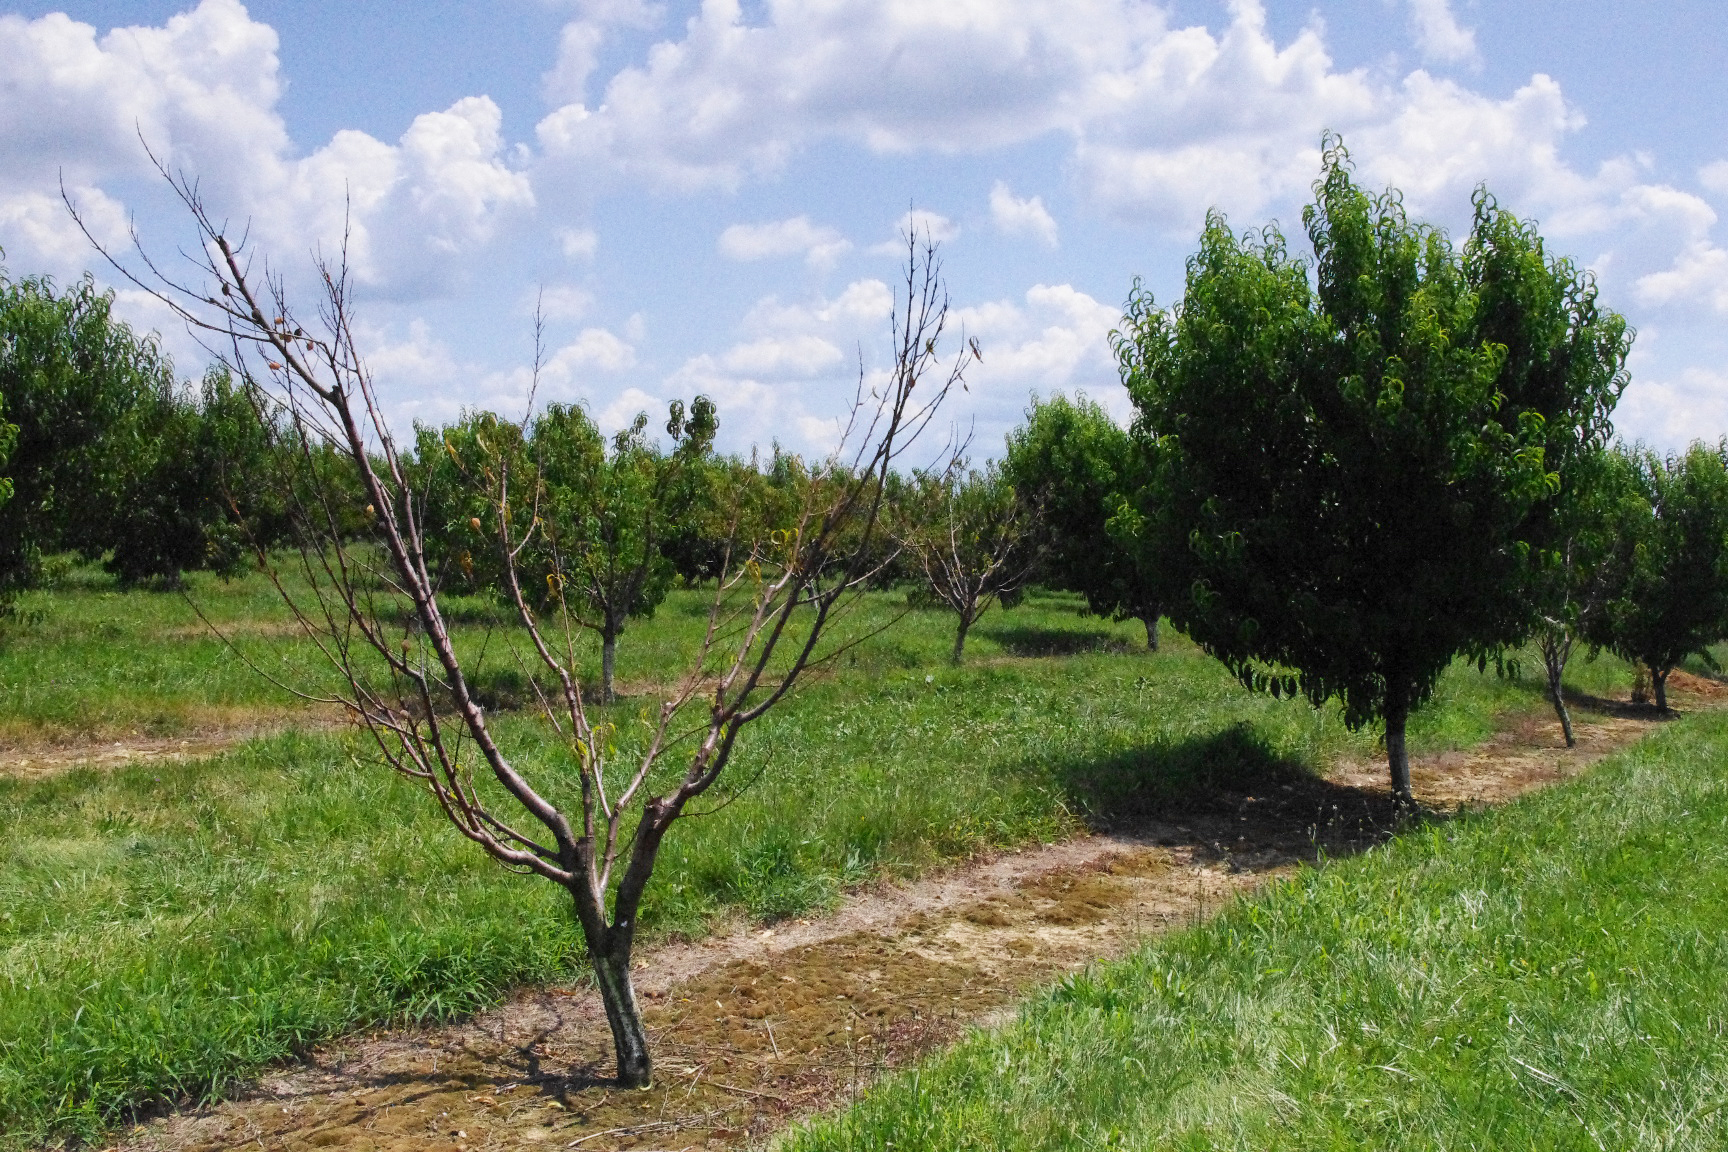 Planting too deeply predisposed this tree to Phytophthora infections and led to tree death. 